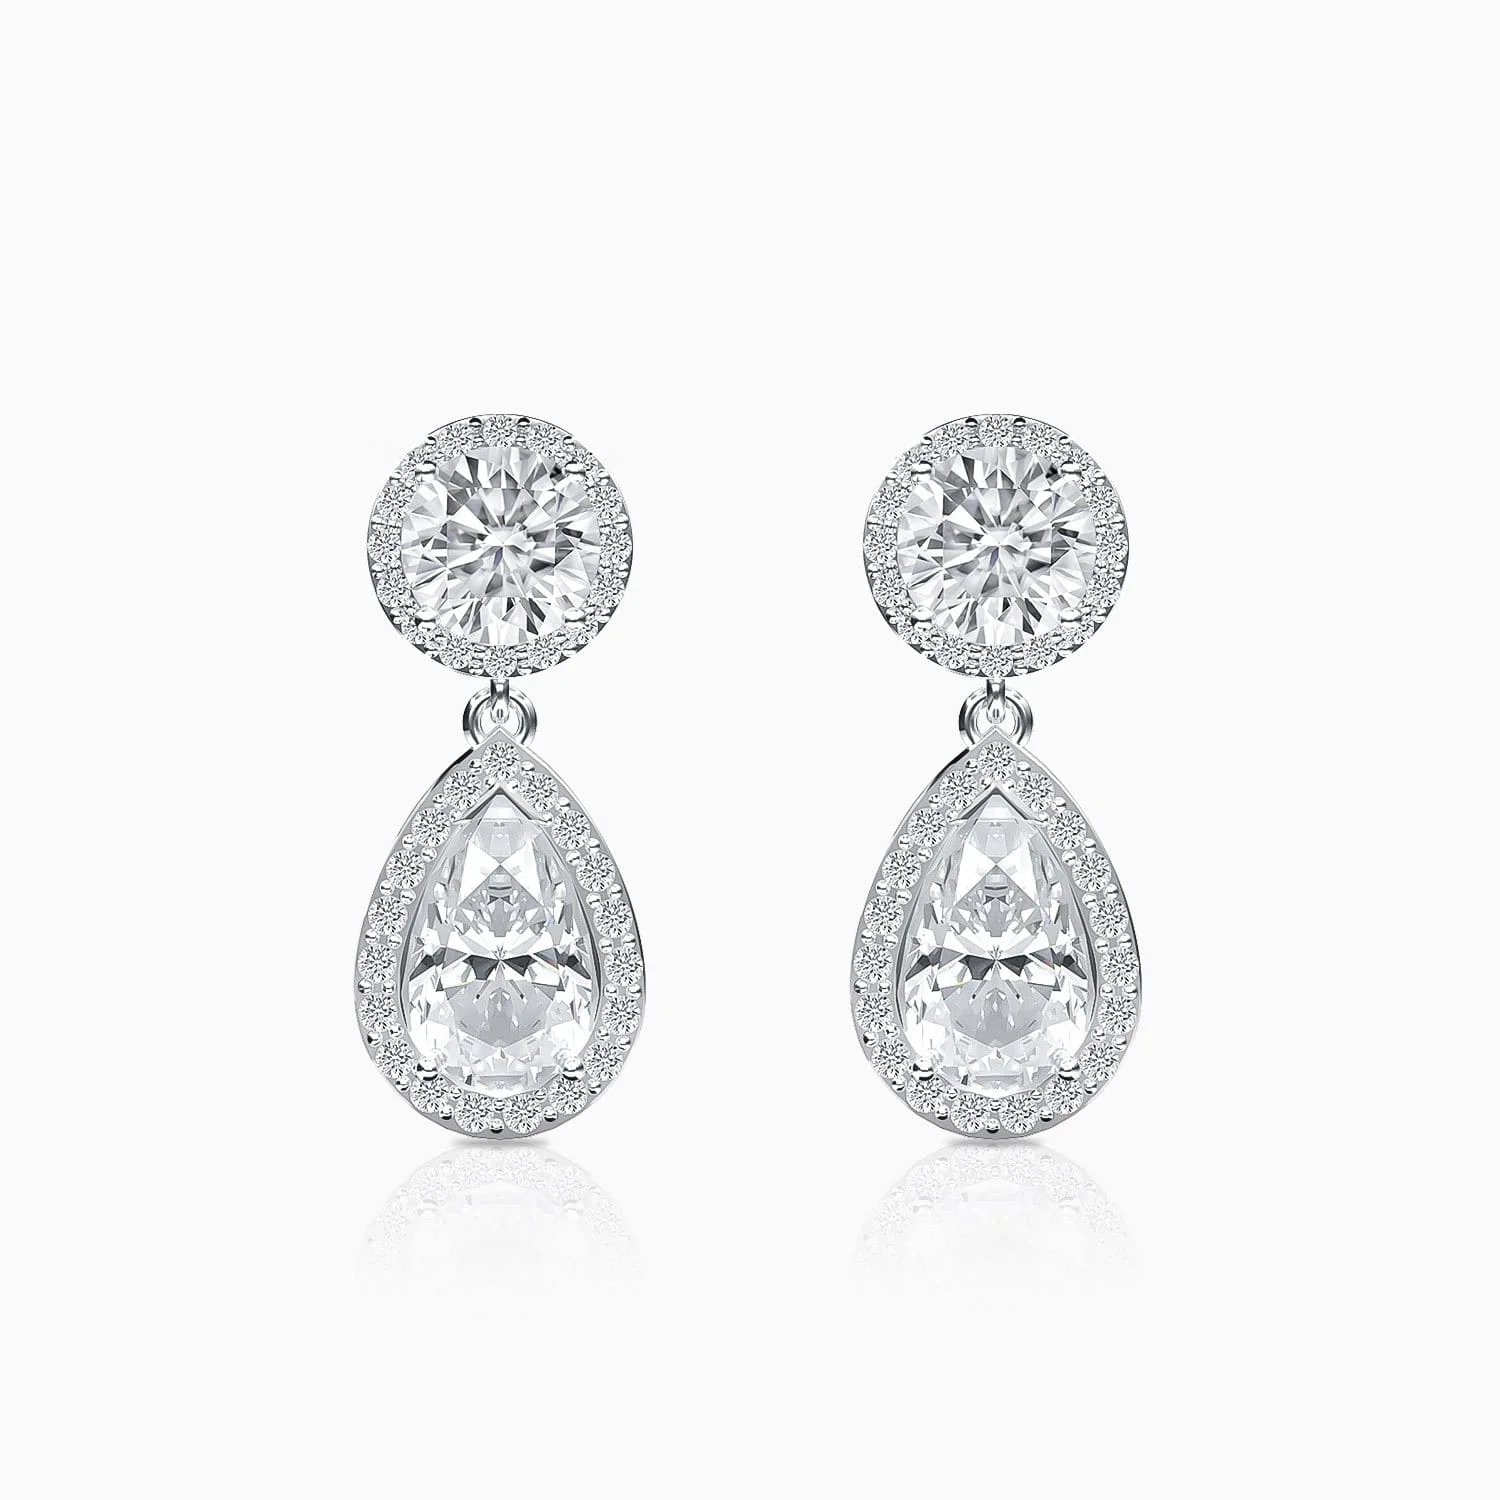 Different Types Of Earring Backs: What You Should Know - LaneWoods Jewelry